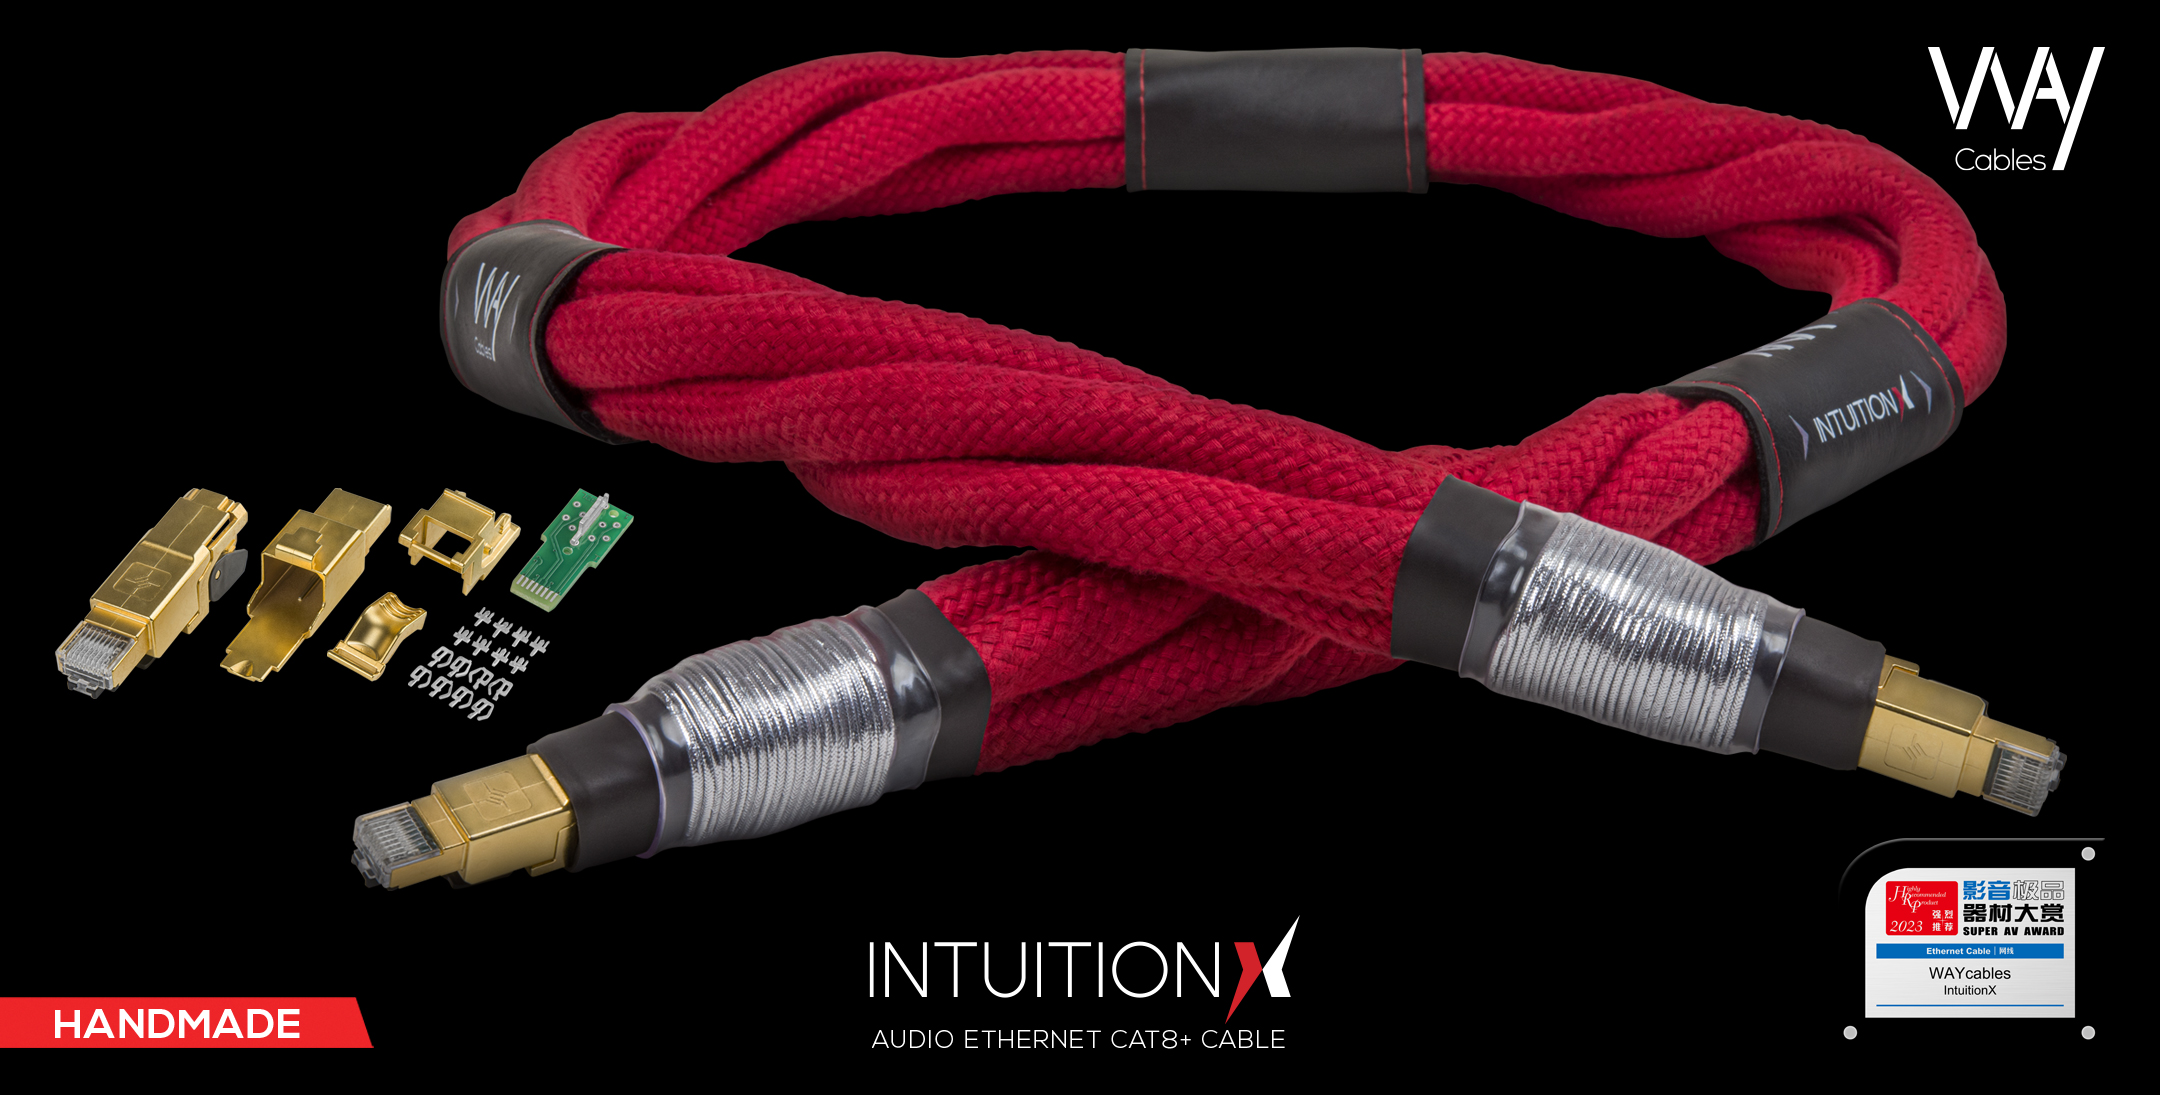 WAY Cables X SERIES ethernet audio cable IntuitionX